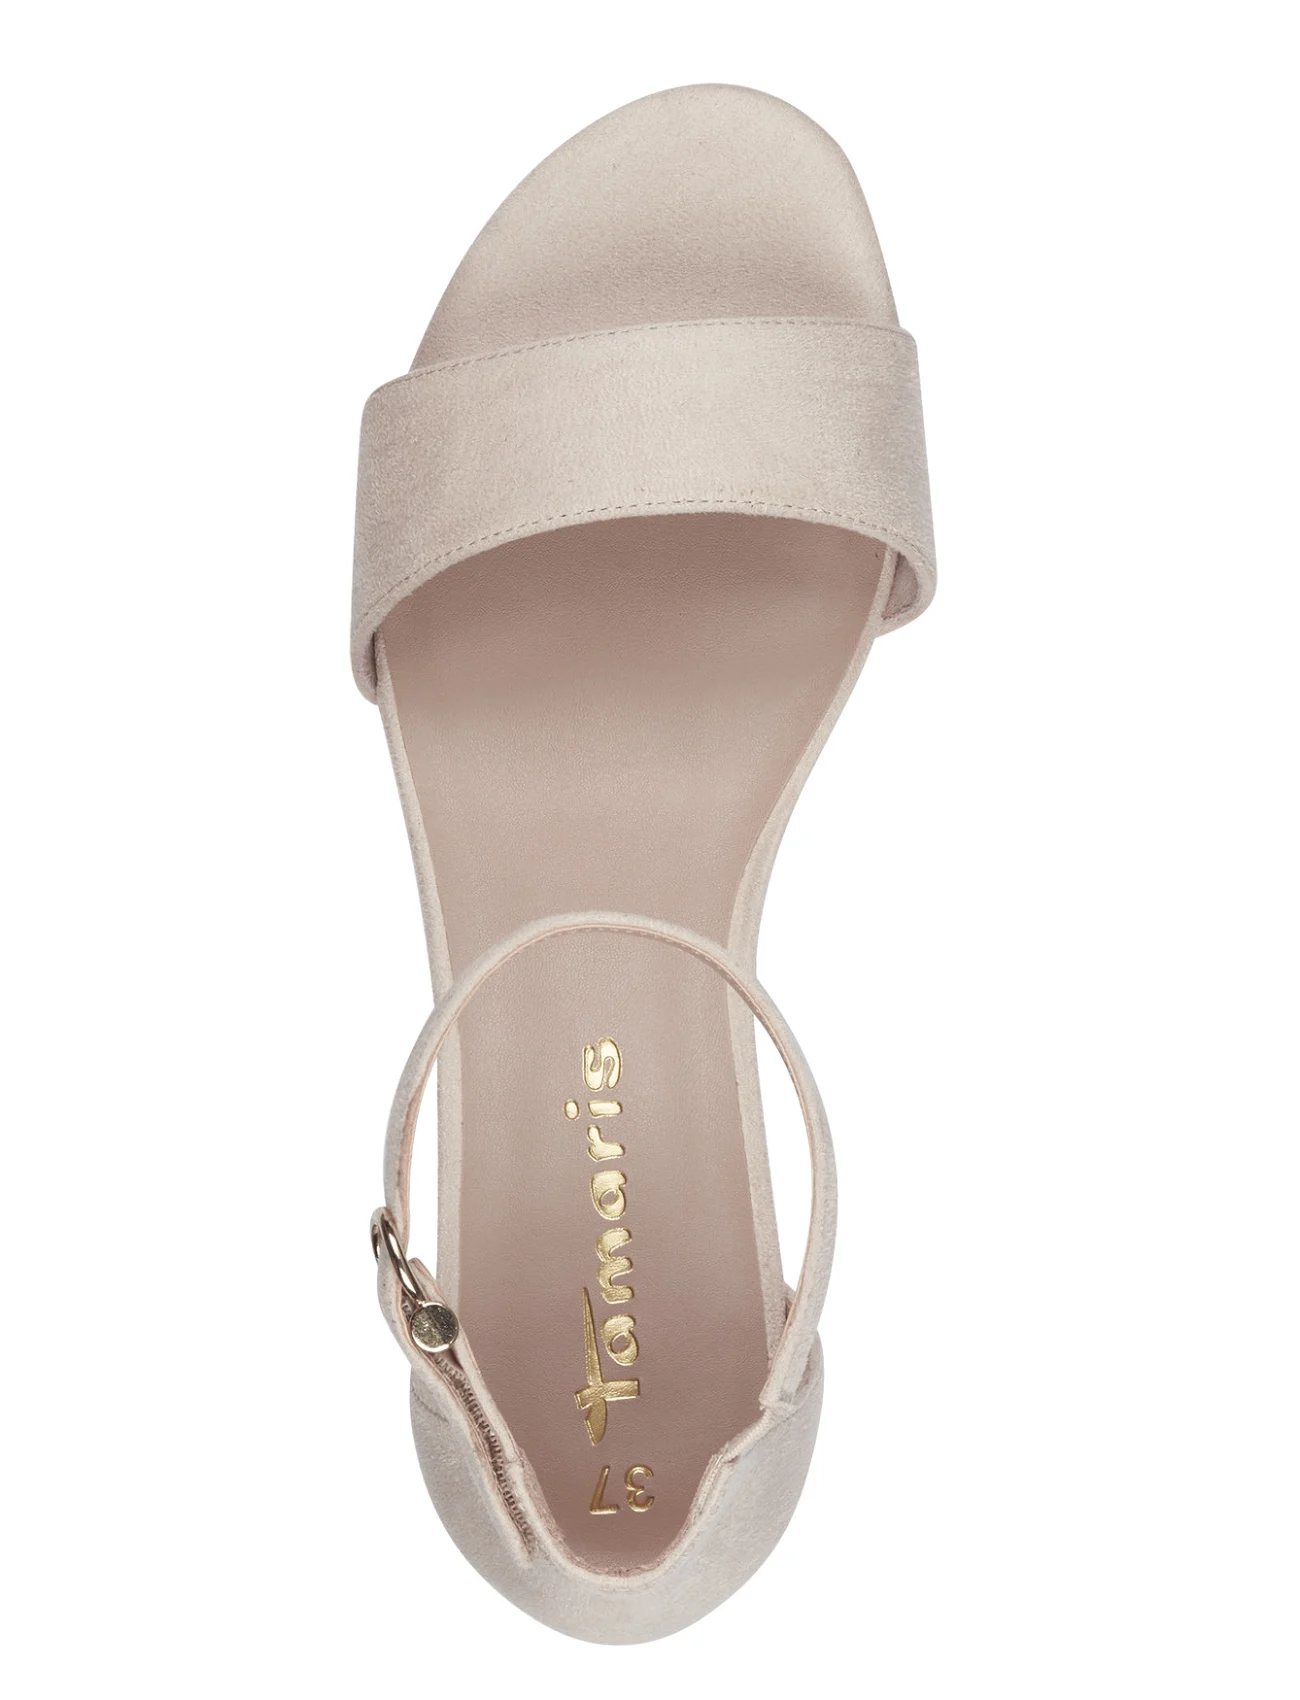 Tamaris - Women Sandals - party wear at outlet prices - nude - 1